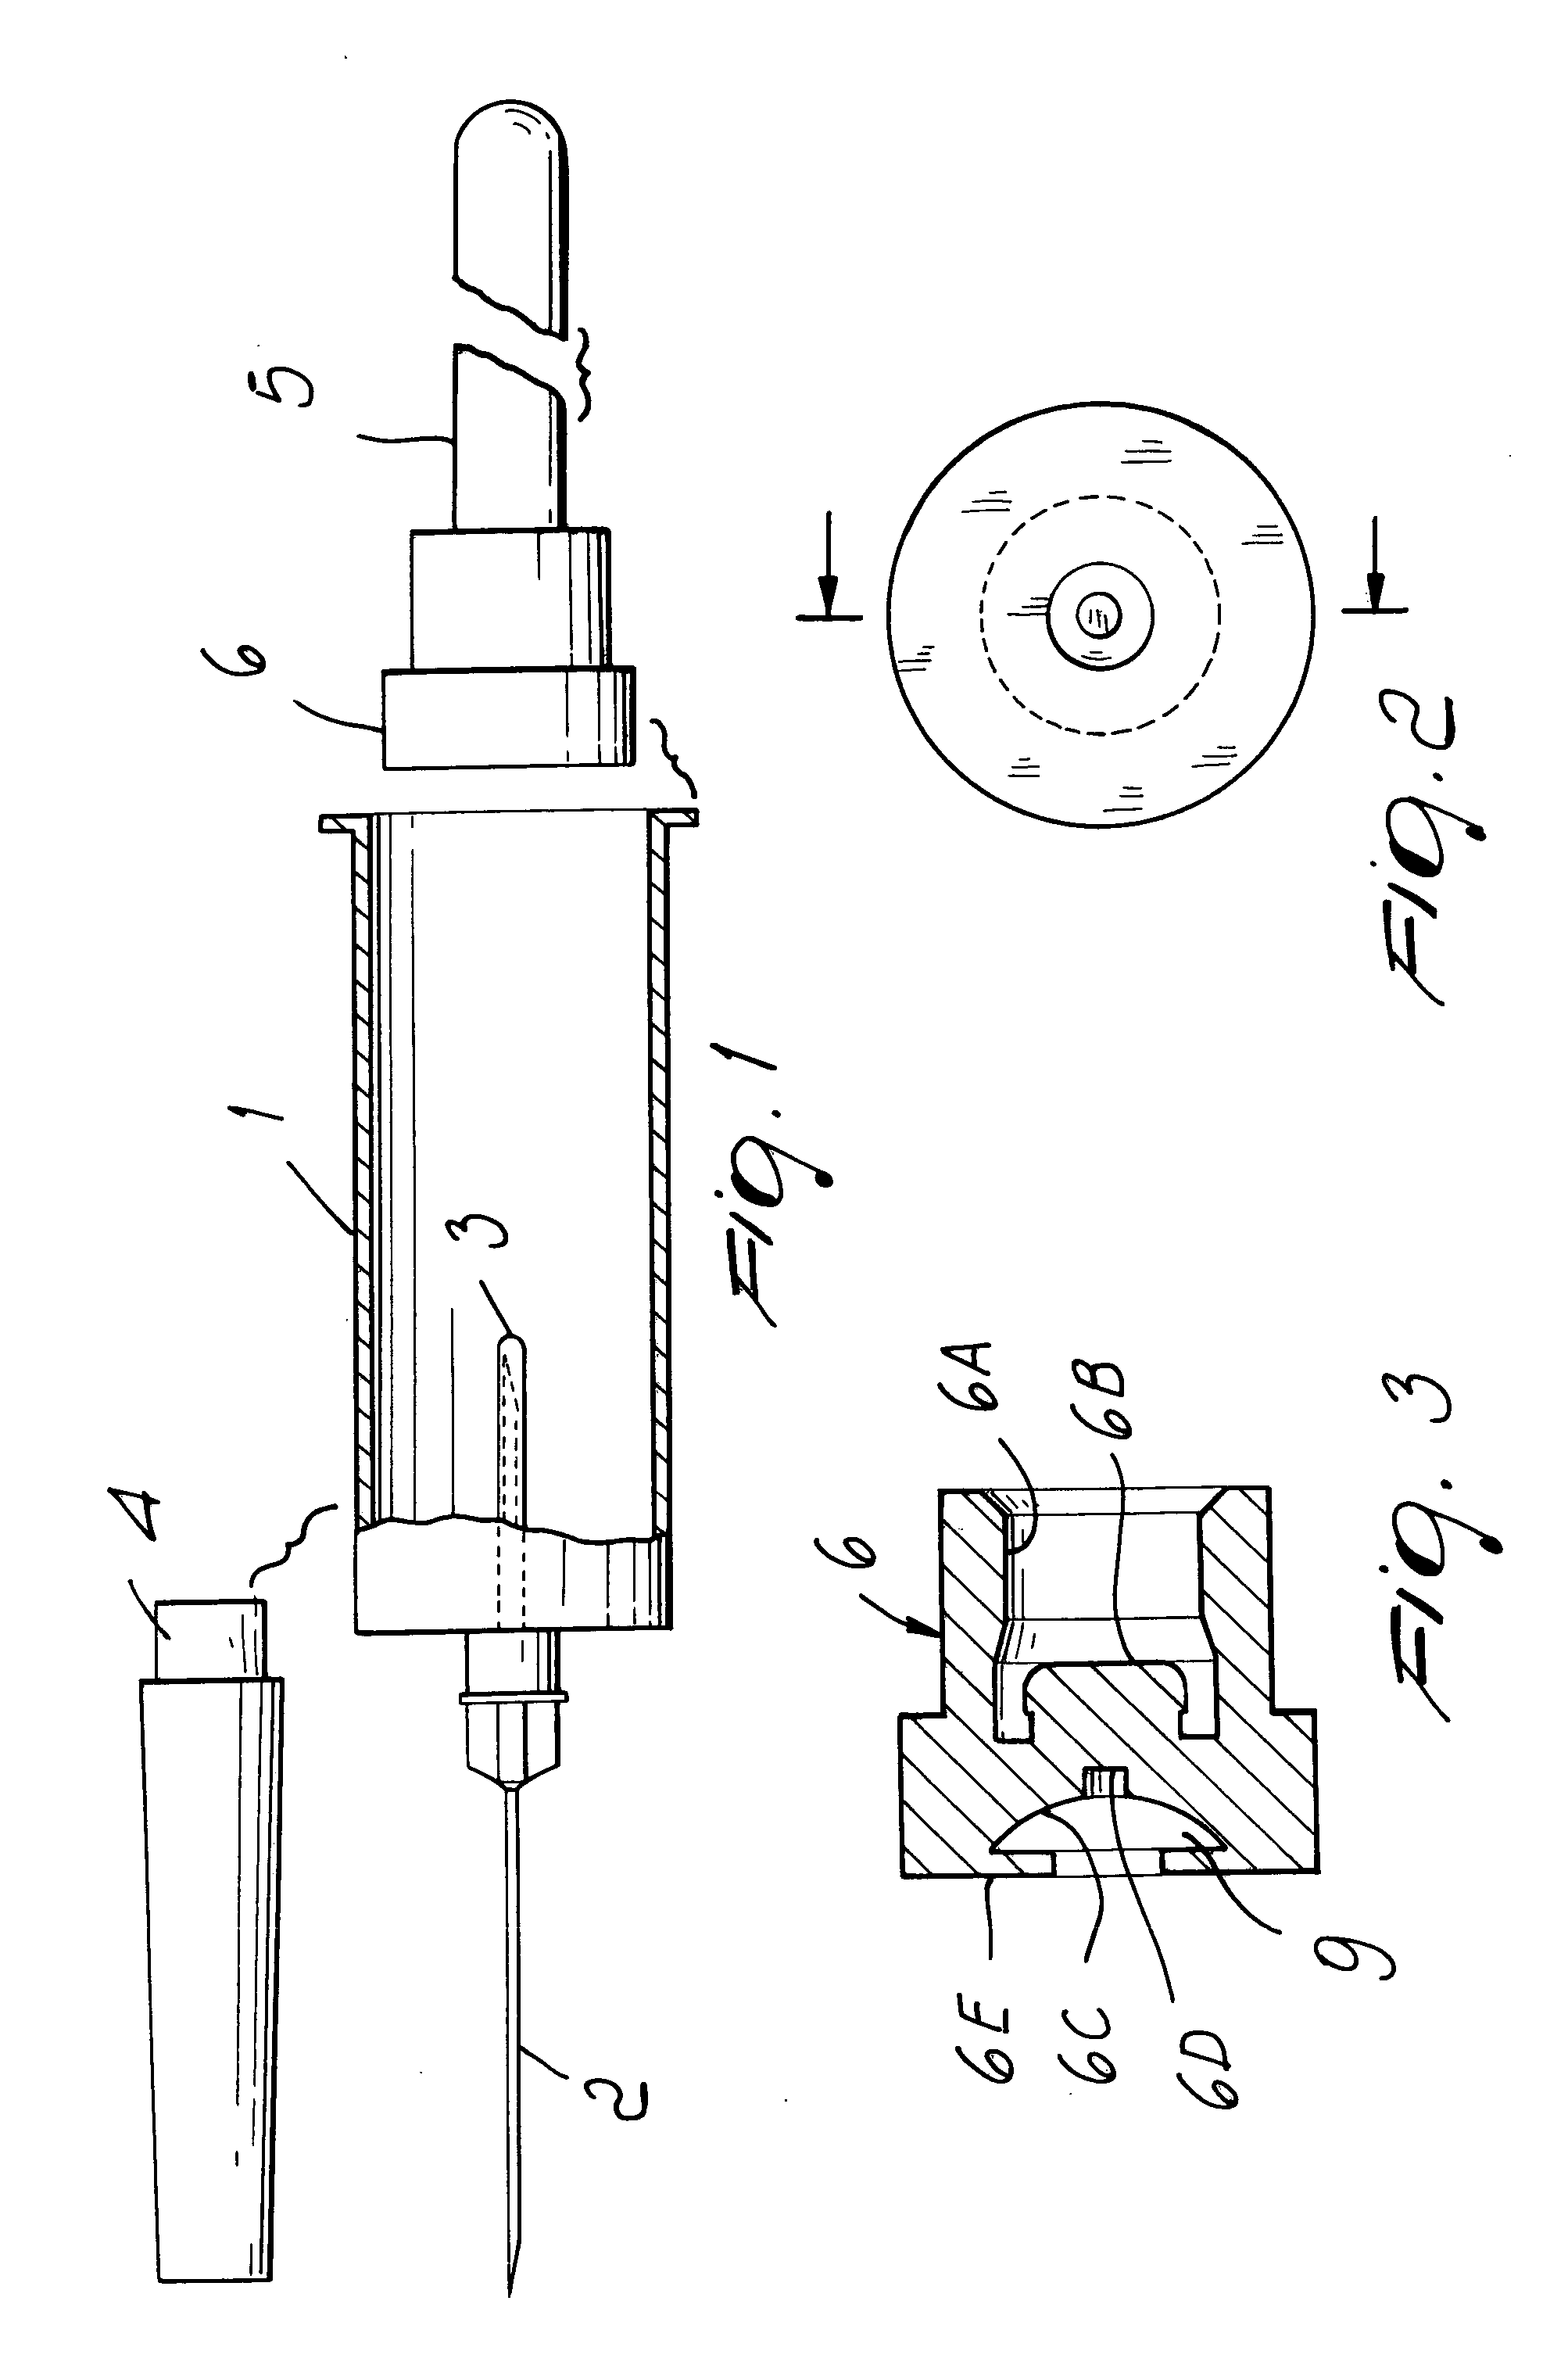 Tube for blood collecting with a vacuum method